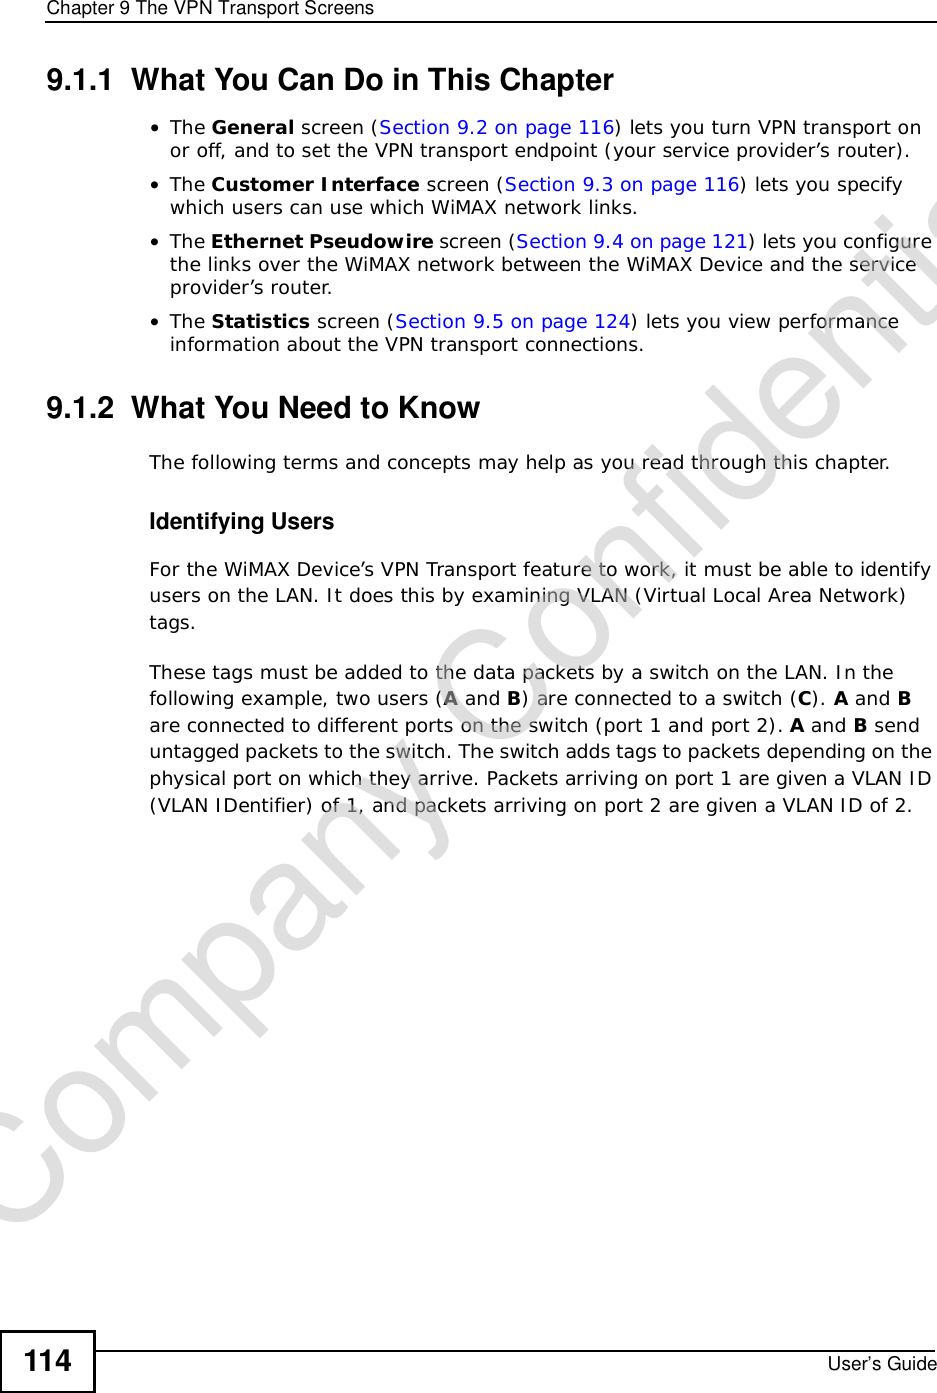 Chapter 9The VPN Transport ScreensUser’s Guide1149.1.1  What You Can Do in This Chapter•The General screen (Section 9.2 on page 116) lets you turn VPN transport on or off, and to set the VPN transport endpoint (your service provider’s router). •The Customer Interface screen (Section 9.3 on page 116) lets you specify which users can use which WiMAX network links.•The Ethernet Pseudowire screen (Section 9.4 on page 121) lets you configure the links over the WiMAX network between the WiMAX Device and the service provider’s router.•The Statistics screen (Section 9.5 on page 124) lets you view performance information about the VPN transport connections.9.1.2  What You Need to KnowThe following terms and concepts may help as you read through this chapter.Identifying UsersFor the WiMAX Device’s VPN Transport feature to work, it must be able to identify users on the LAN. It does this by examining VLAN (Virtual Local Area Network) tags.These tags must be added to the data packets by a switch on the LAN. In the following example, two users (A and B) are connected to a switch (C). A and Bare connected to different ports on the switch (port 1 and port 2). A and B send untagged packets to the switch. The switch adds tags to packets depending on the physical port on which they arrive. Packets arriving on port 1 are given a VLAN ID (VLAN IDentifier) of 1, and packets arriving on port 2 are given a VLAN ID of 2. Company Confidential